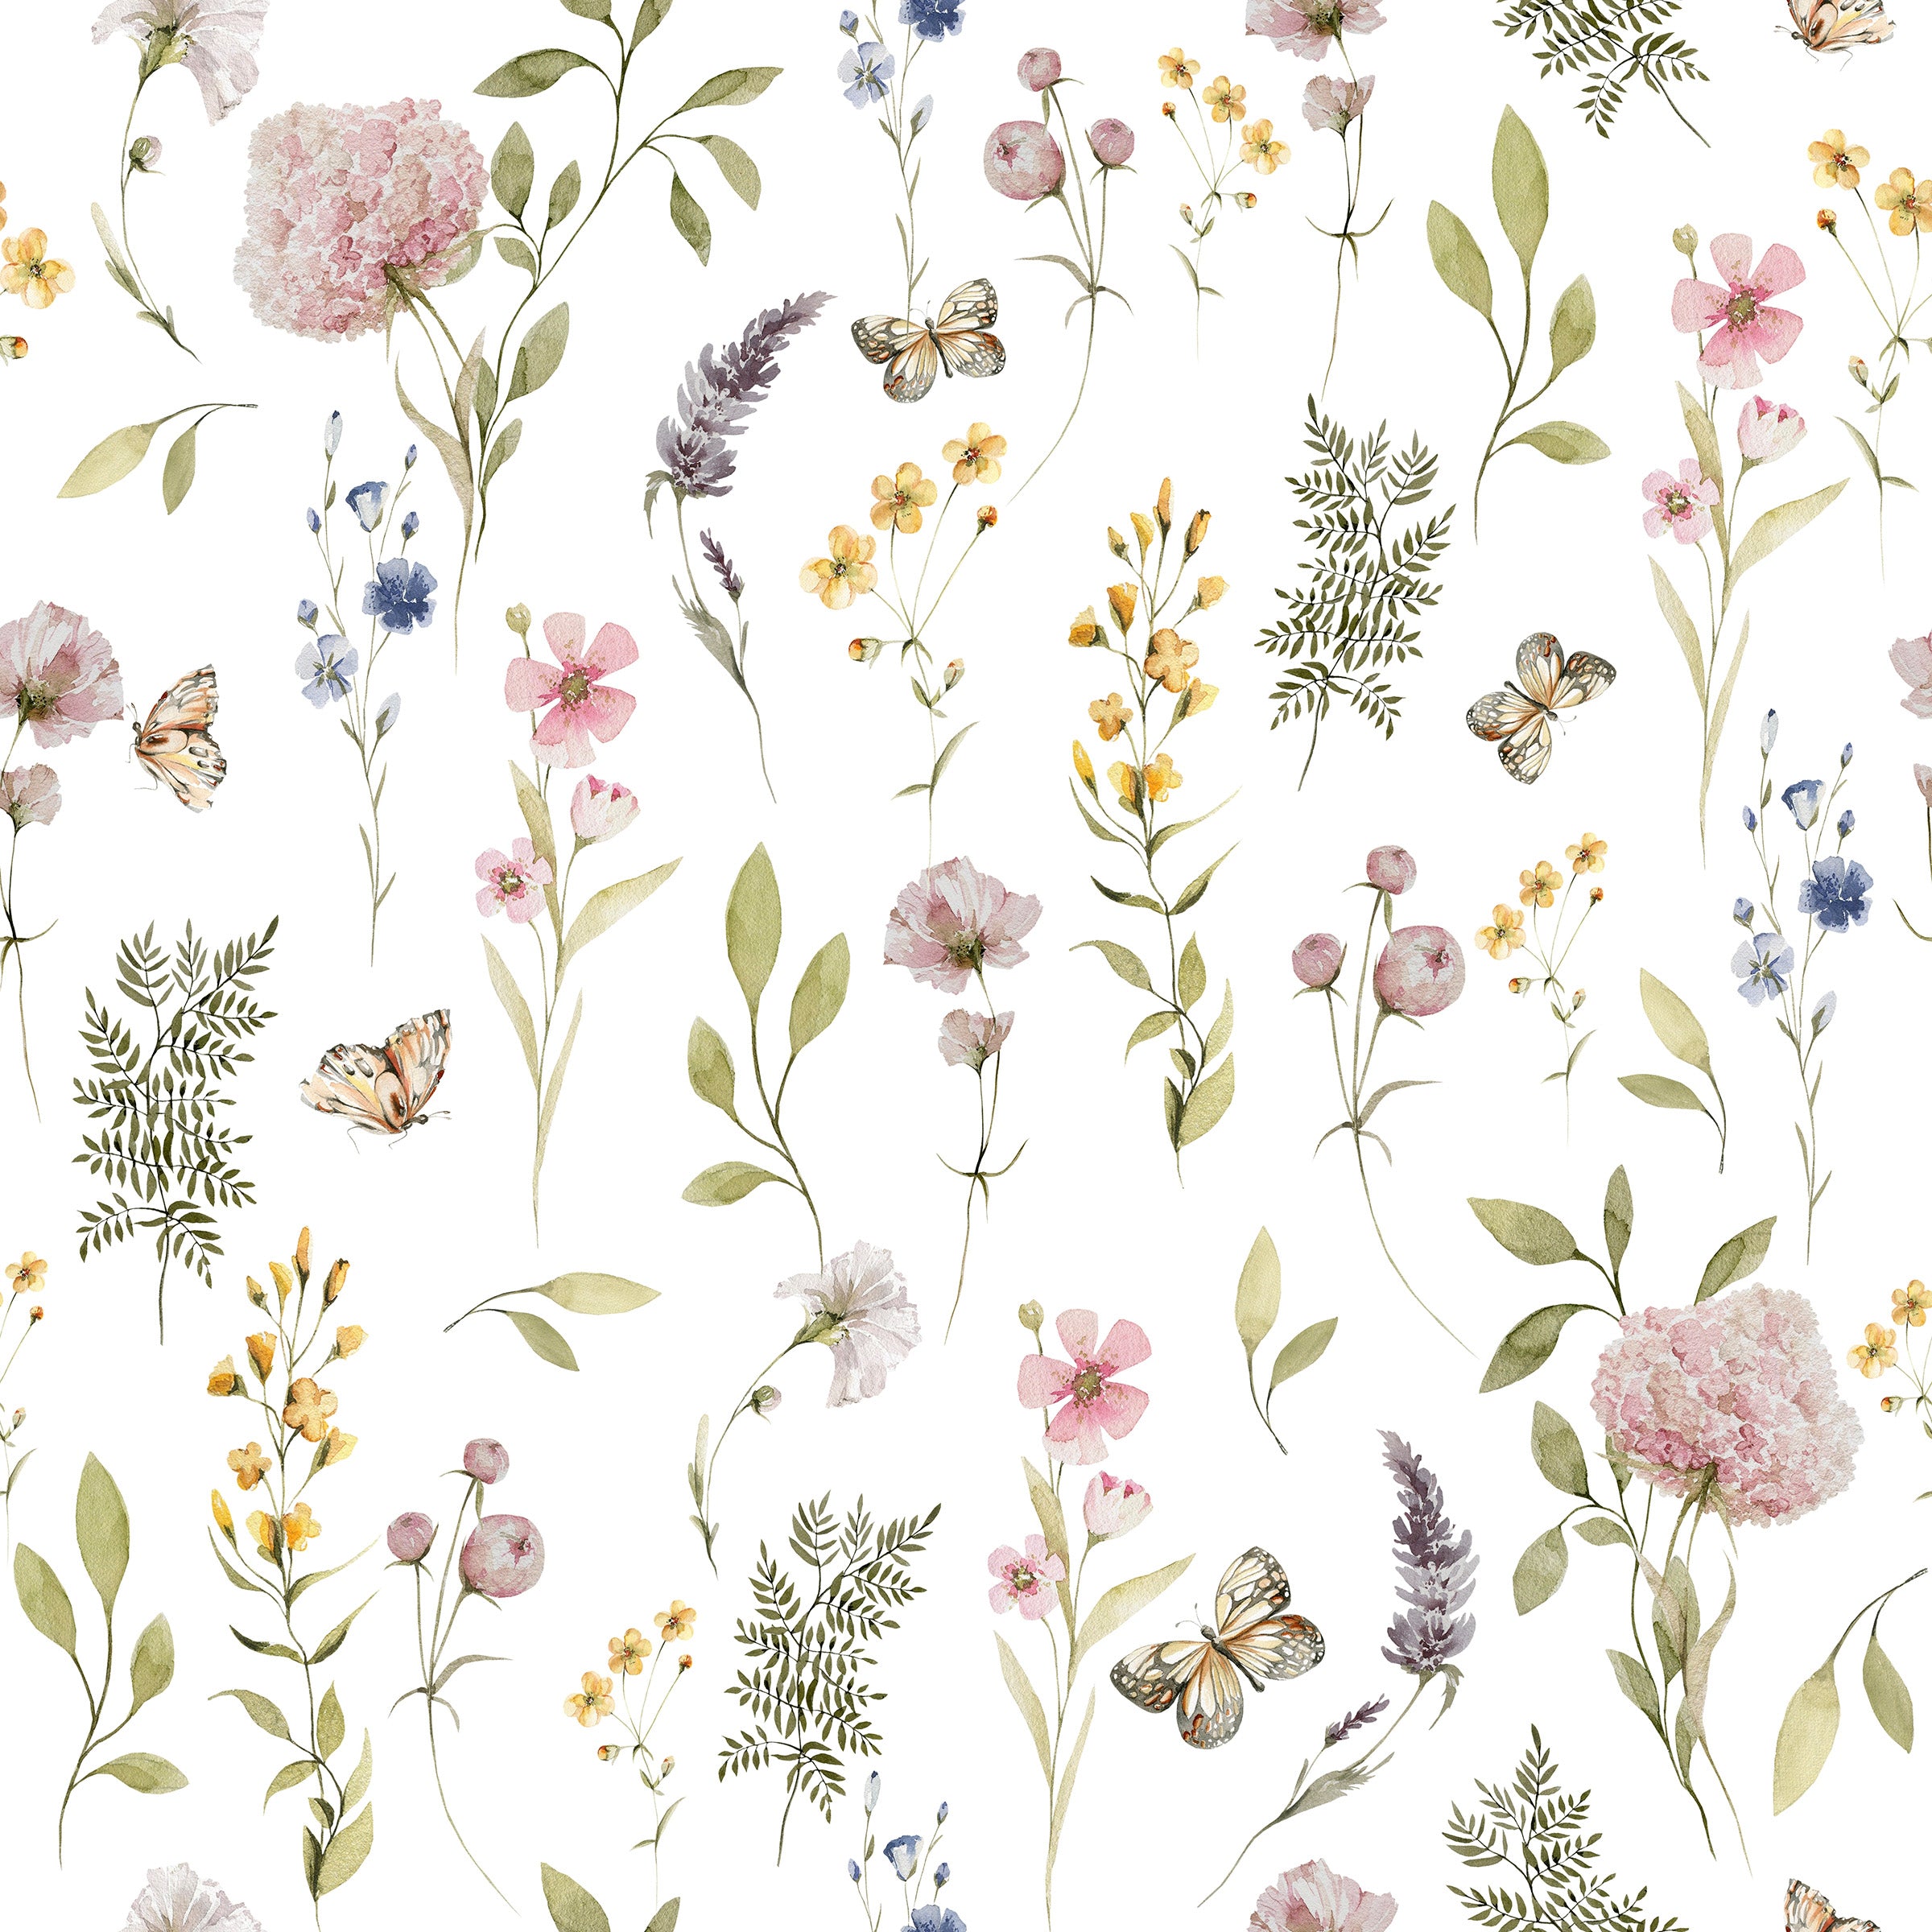 The Floral Fields Wallpaper displays a rich tapestry of blooming flowers, fluttering butterflies, and sprigs of greenery set against a crisp white background, providing a vibrant, naturalistic feel that captures the essence of a spring meadow.